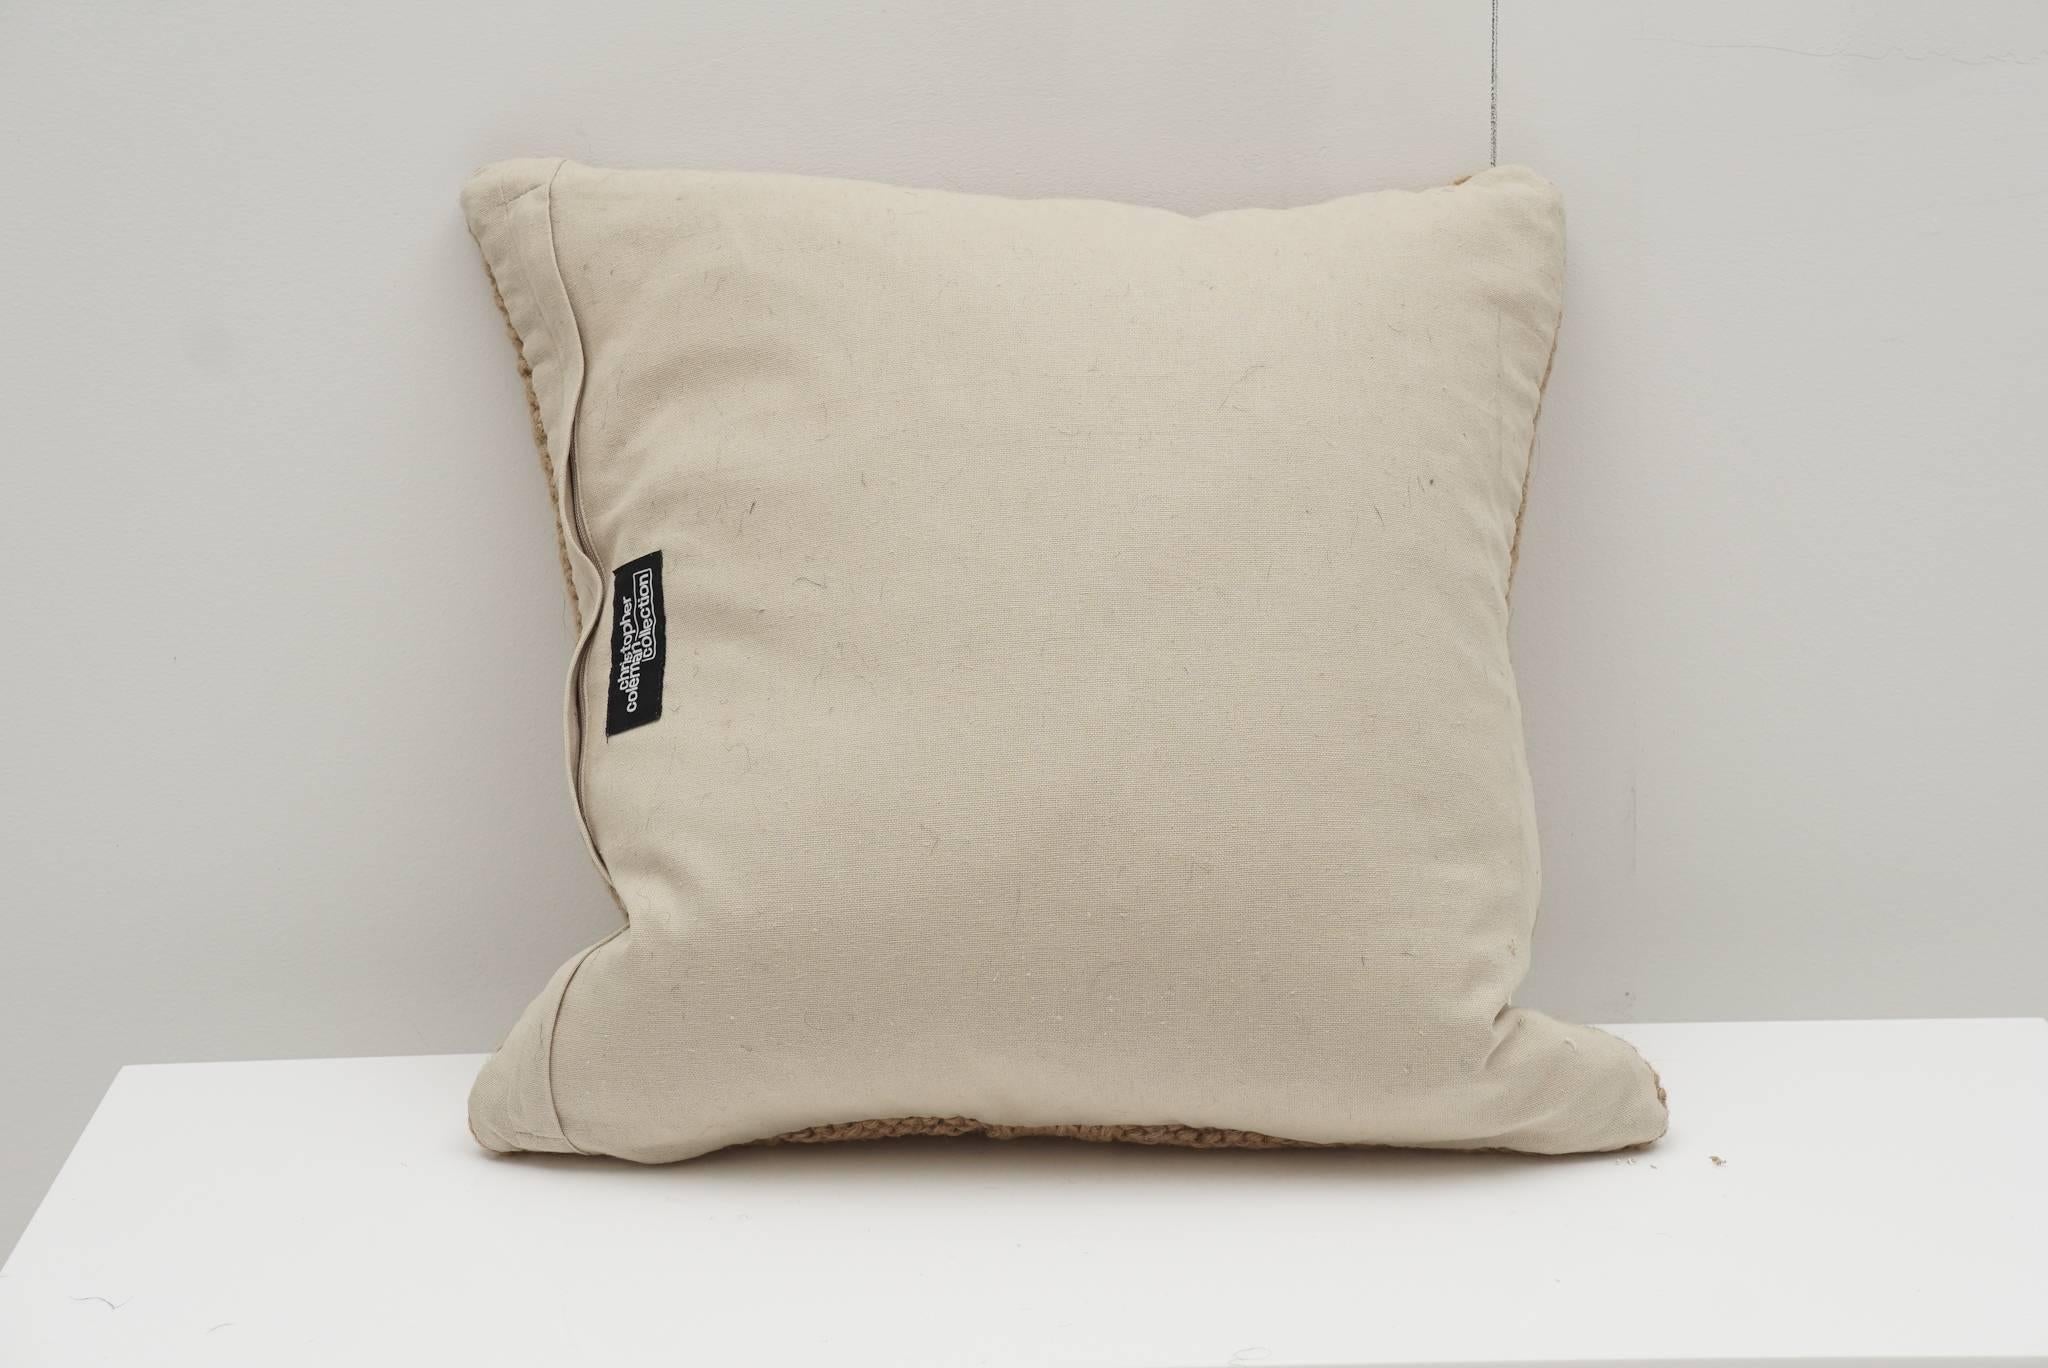 American Cable Knit Hemp Pillows For Sale